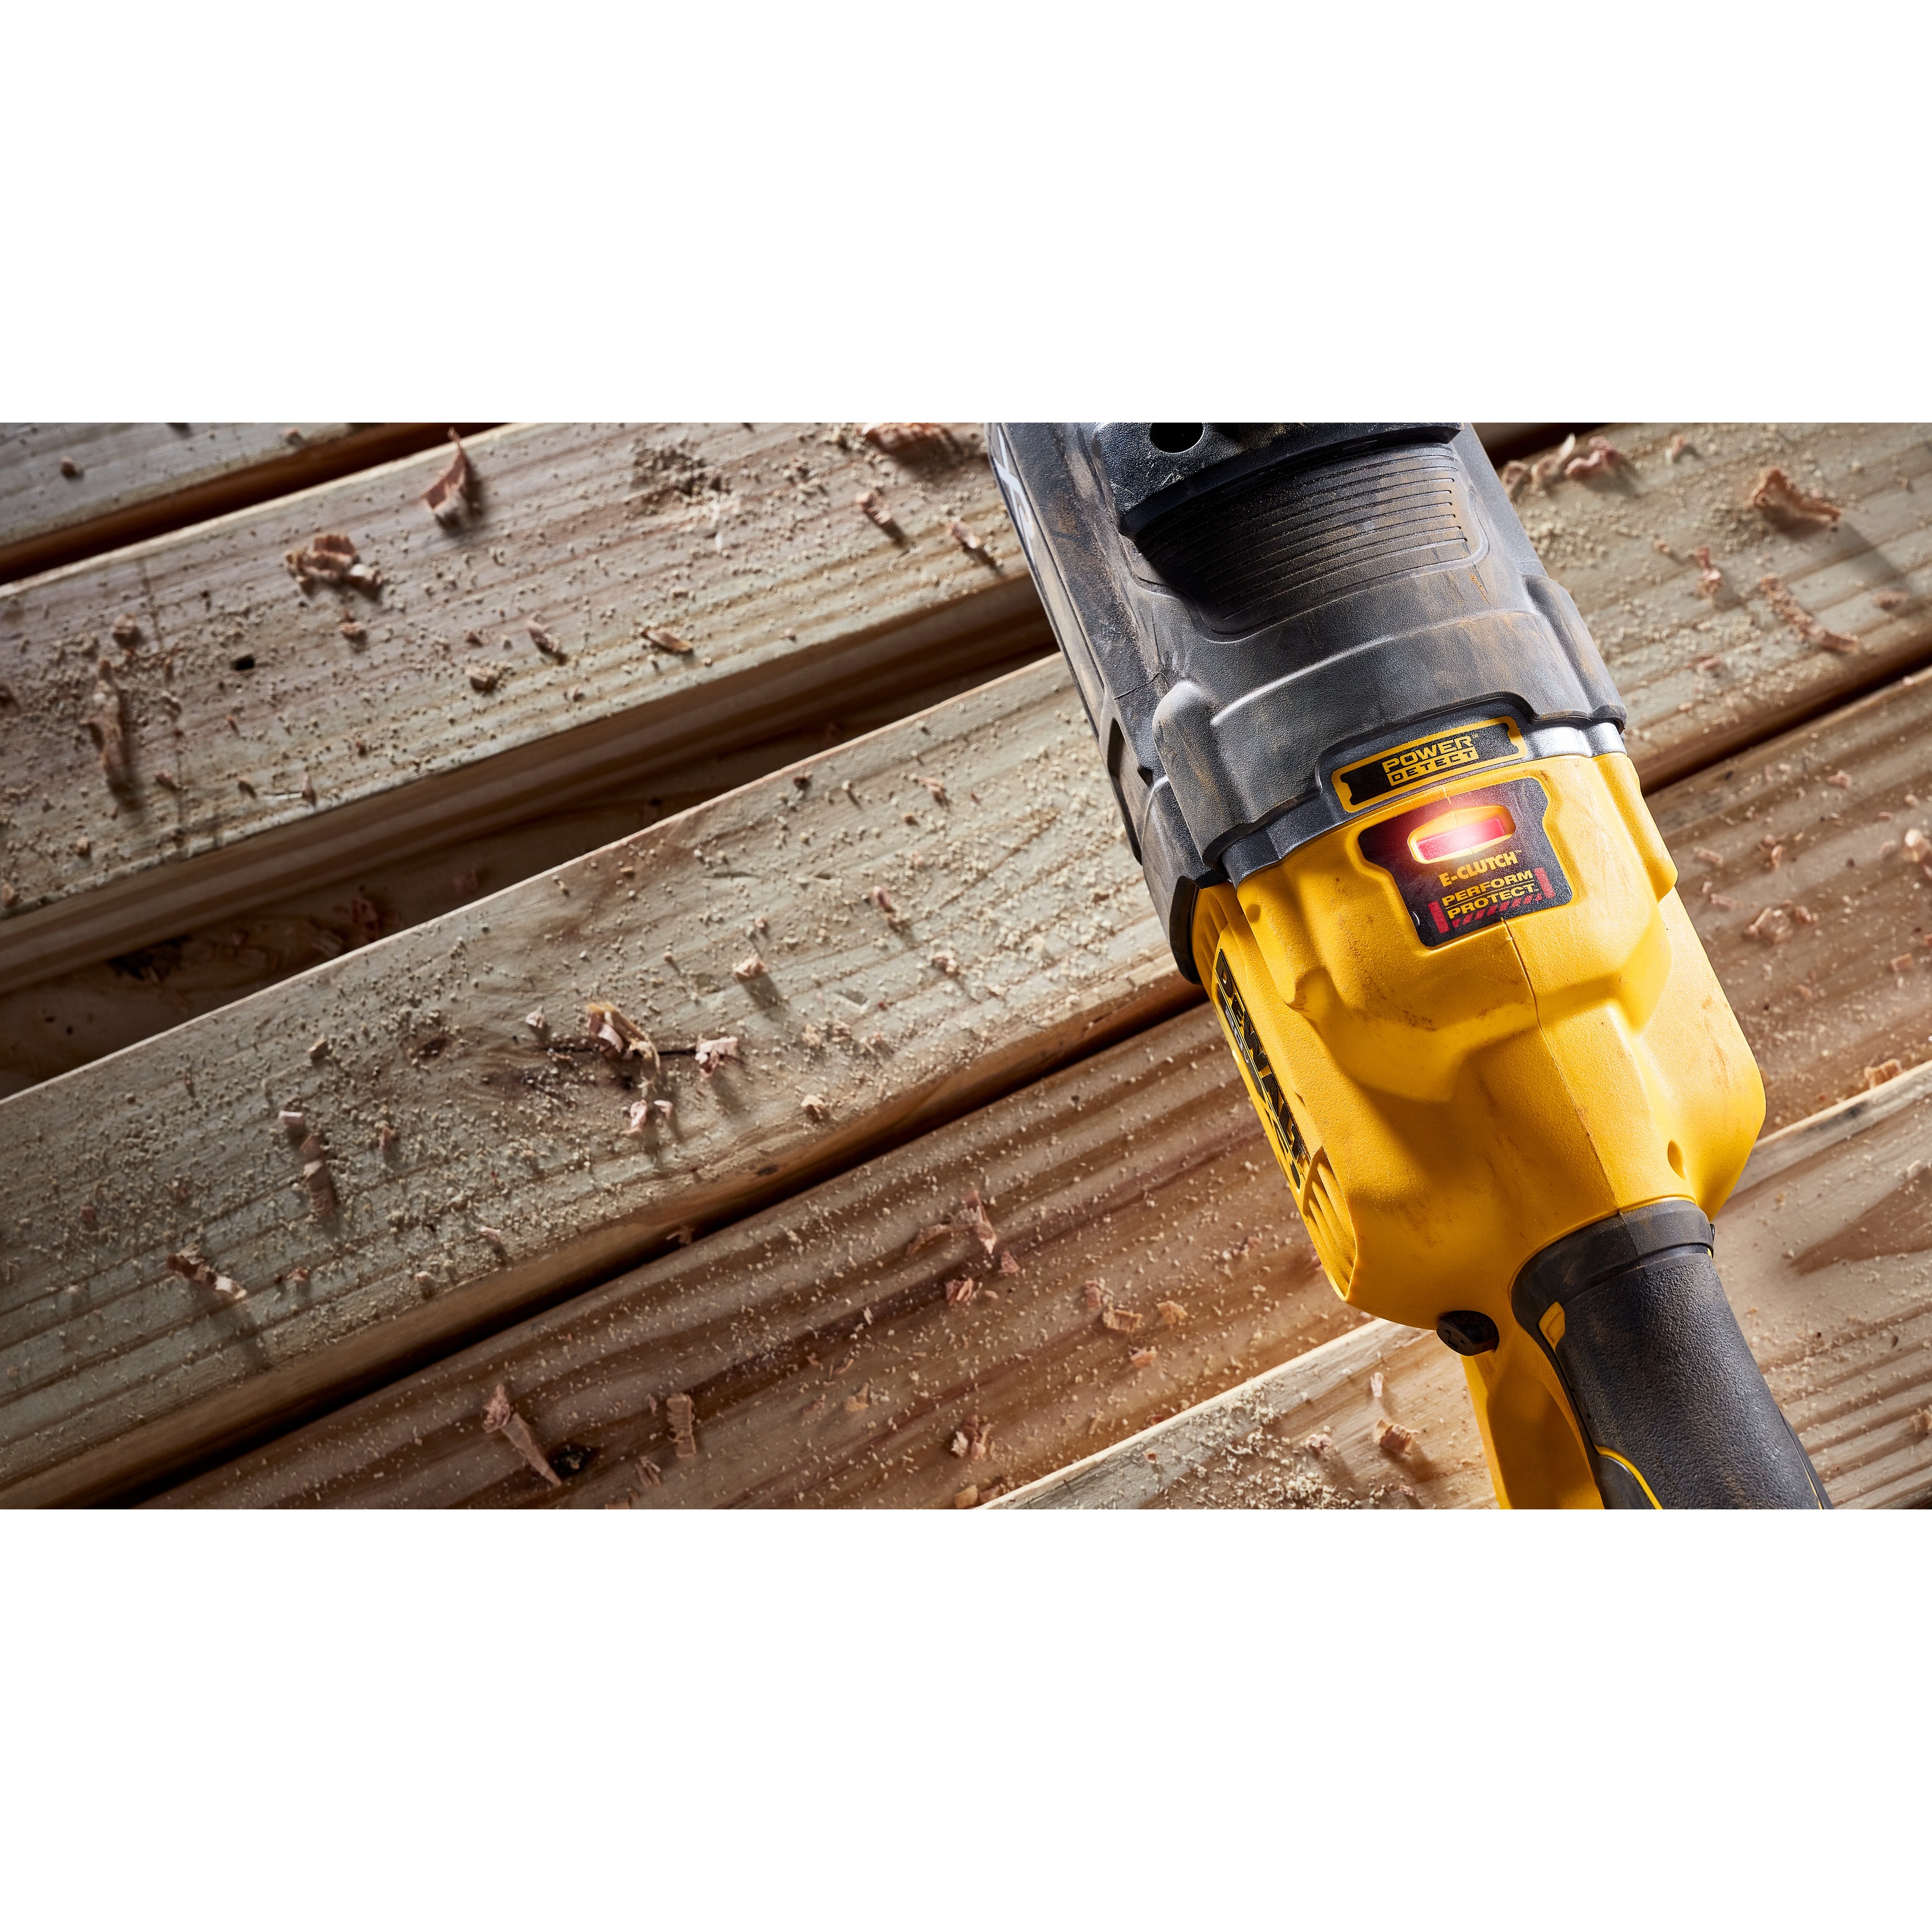 DEWALT - 20V MAX XR Brushless Cordless 716 in Compact Quick Change Stud and Joist Drill with POWER DETECT Tool Only - DCD443B